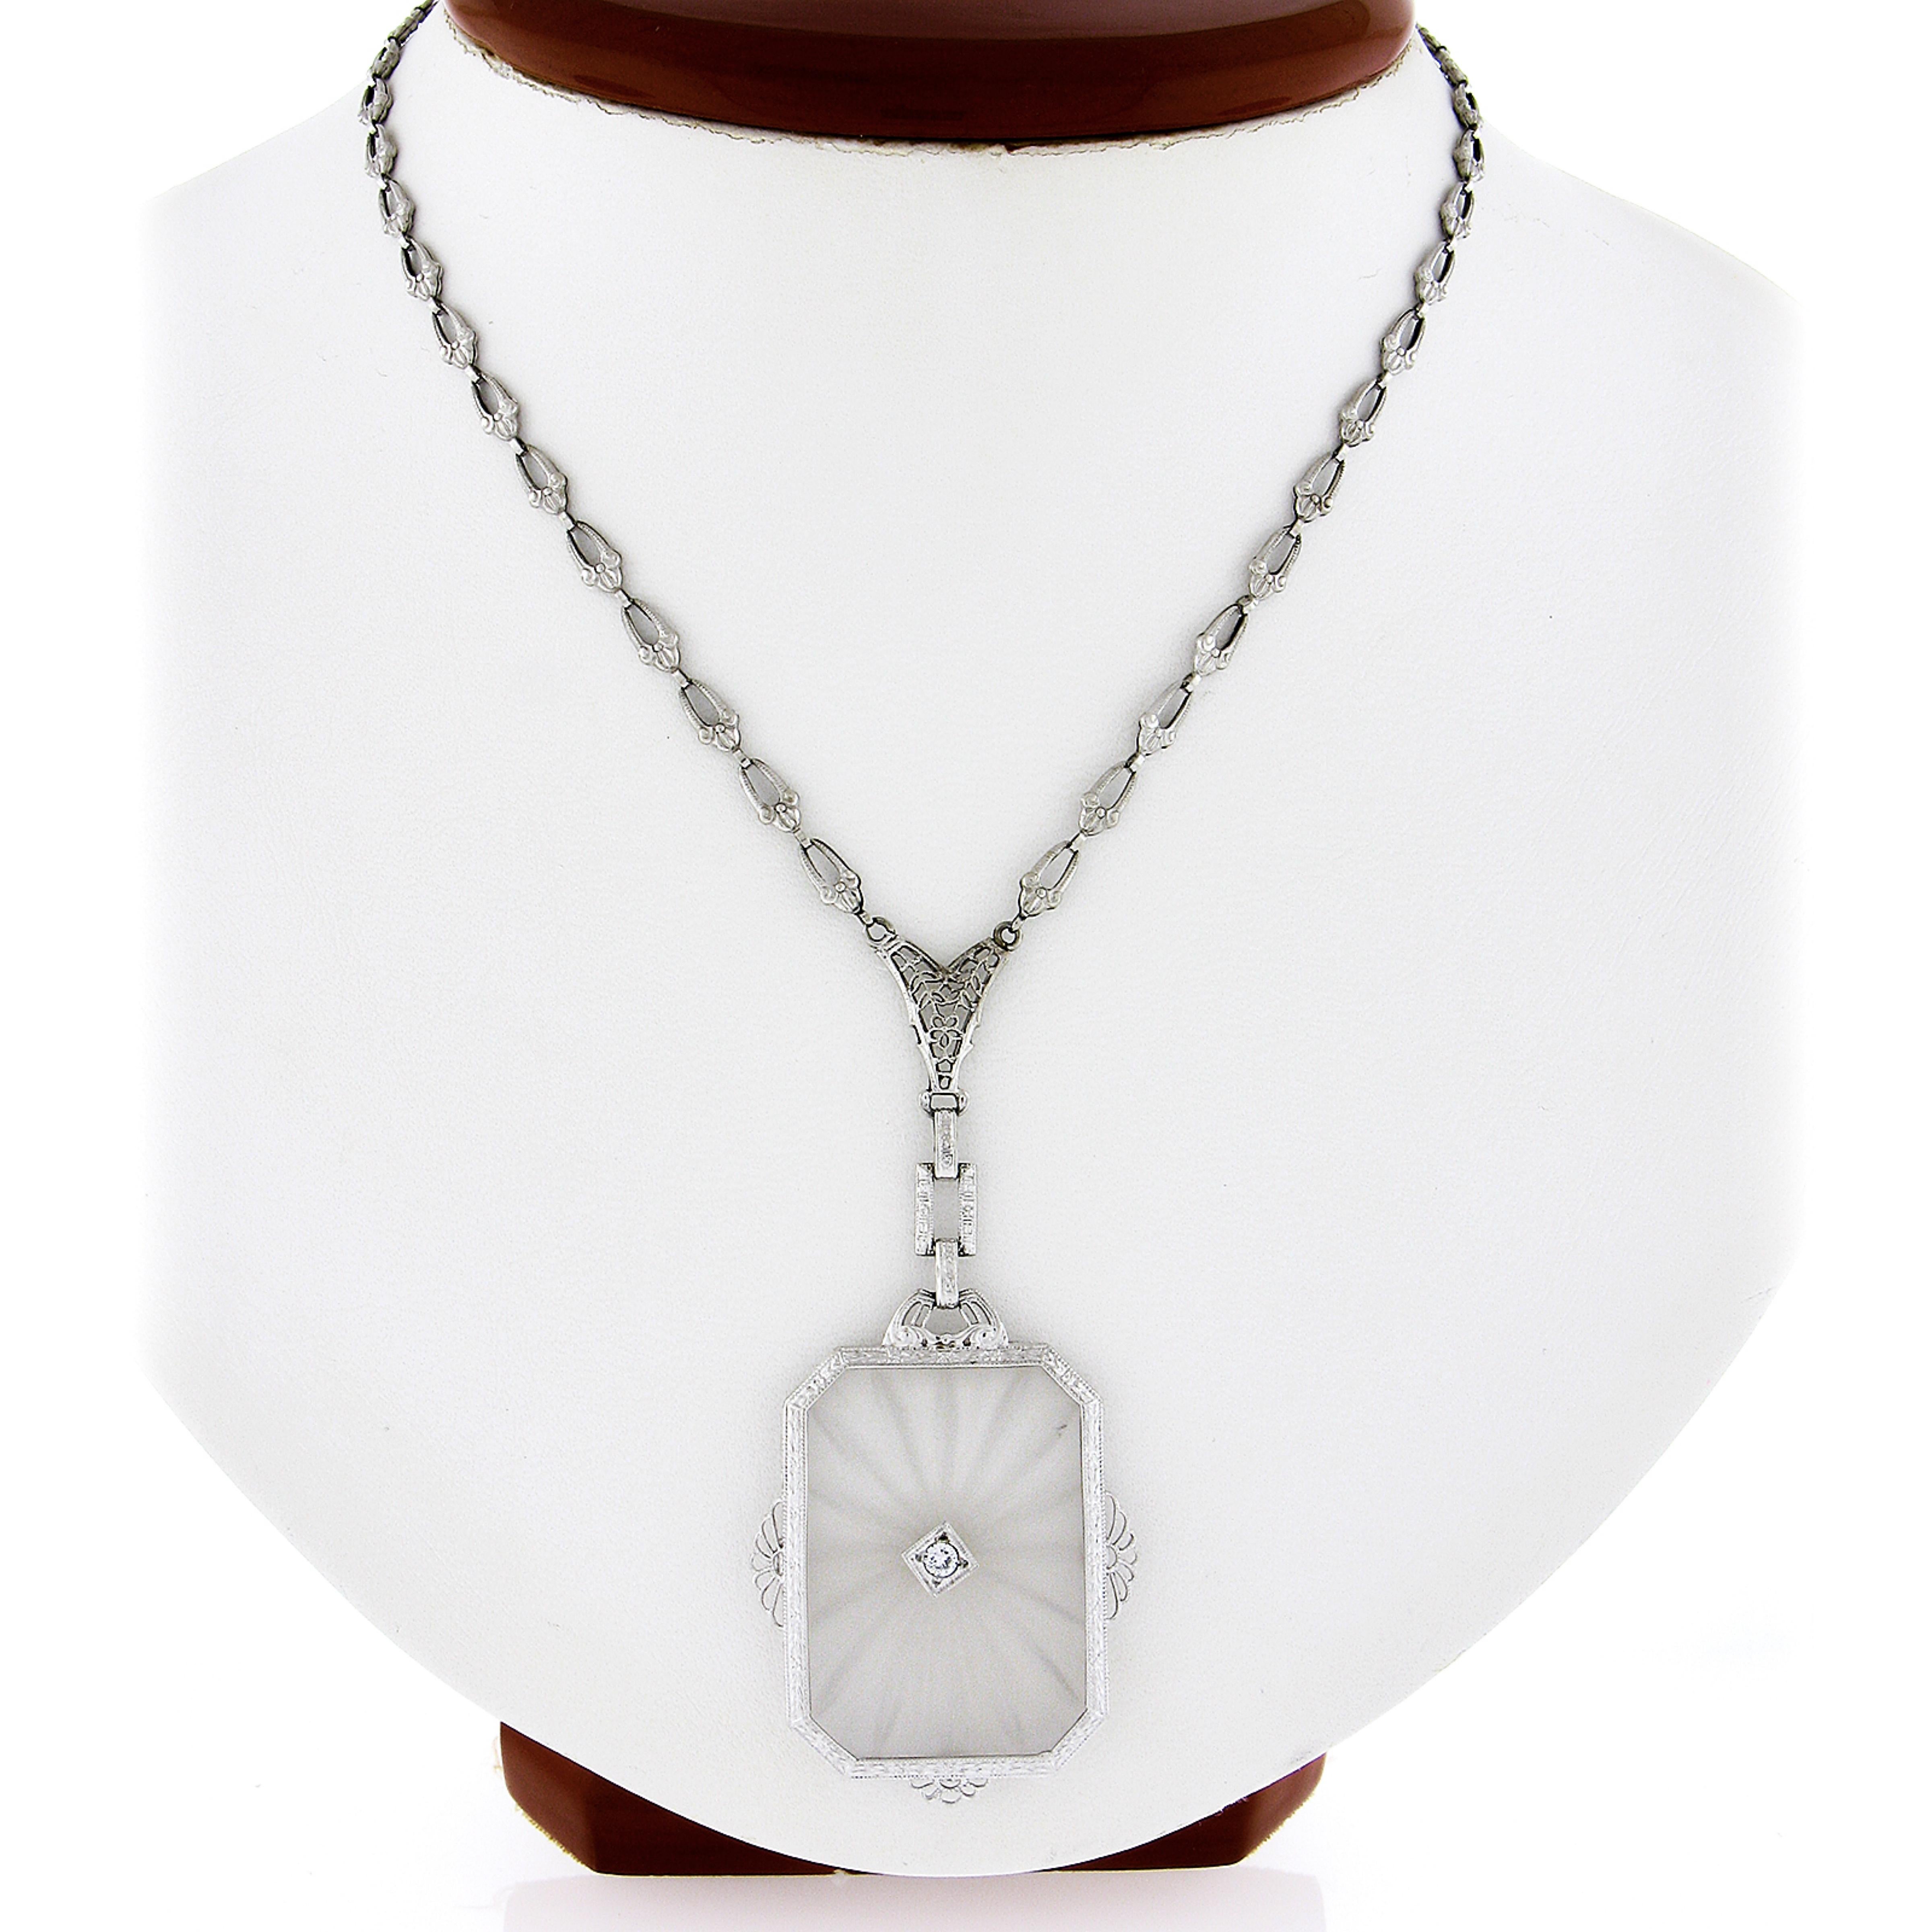 This is a gorgeous and rare necklace crafted during the art deco period in solid 14k white gold. It features a large, rectangular-shaped, carved camphor glass with the frame and links that attach to the chain having magnificent etching designs and